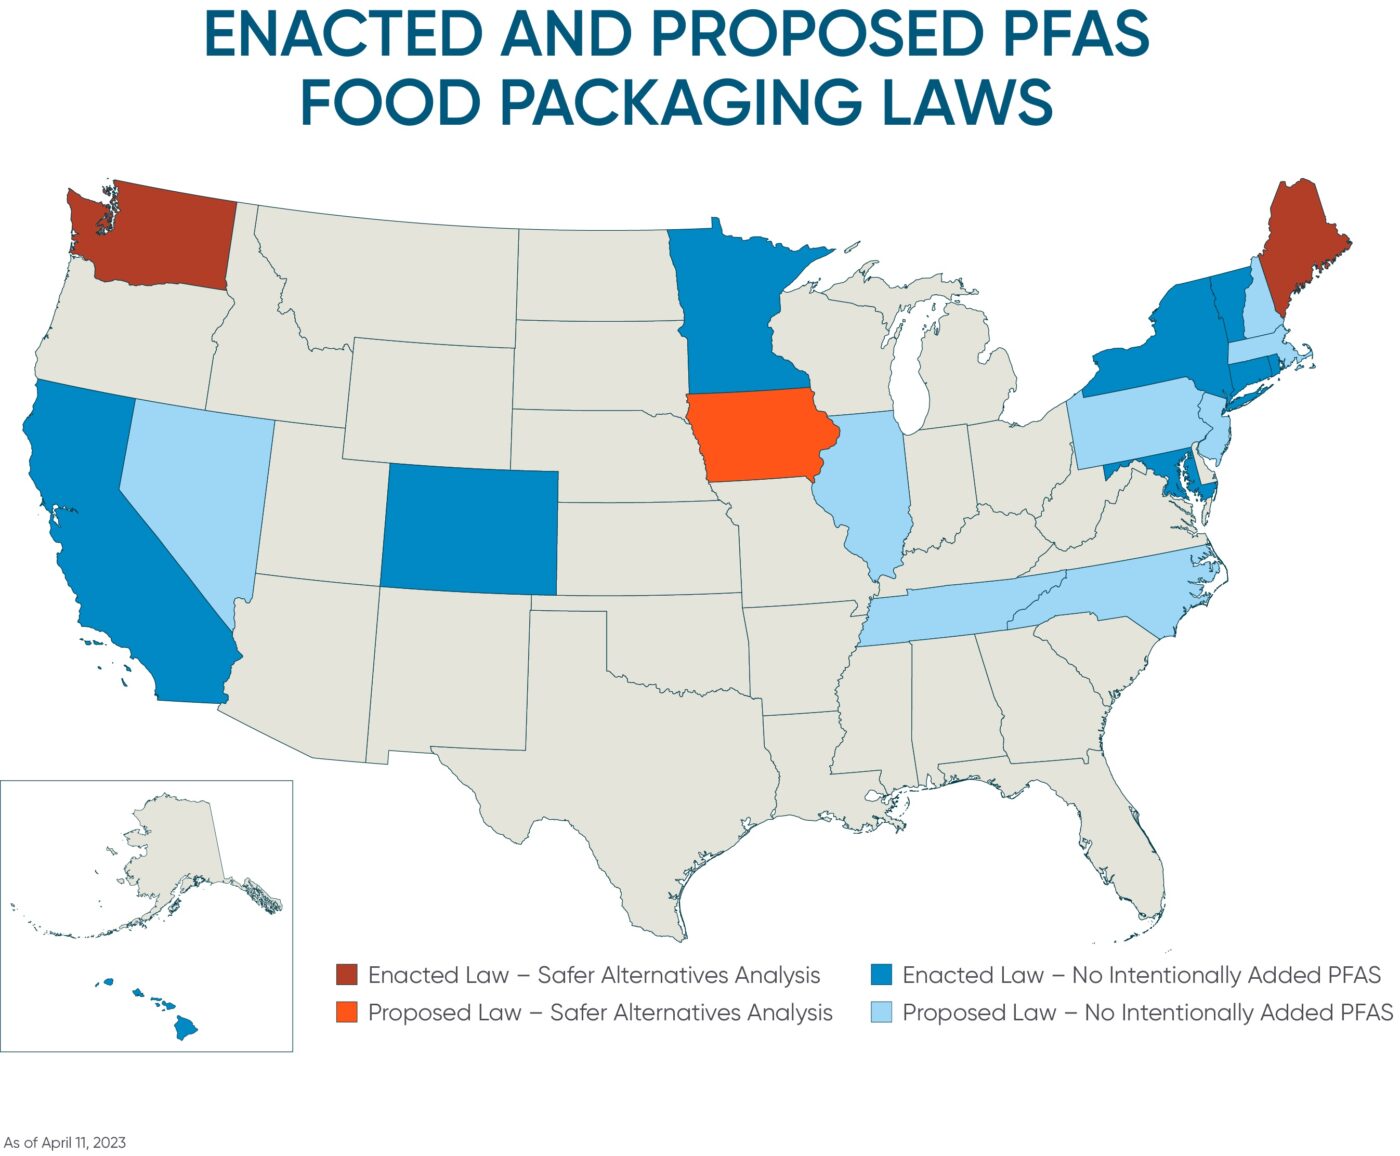 enacted-and-proposed-pfas-food-packaging-laws-map-5-11-232